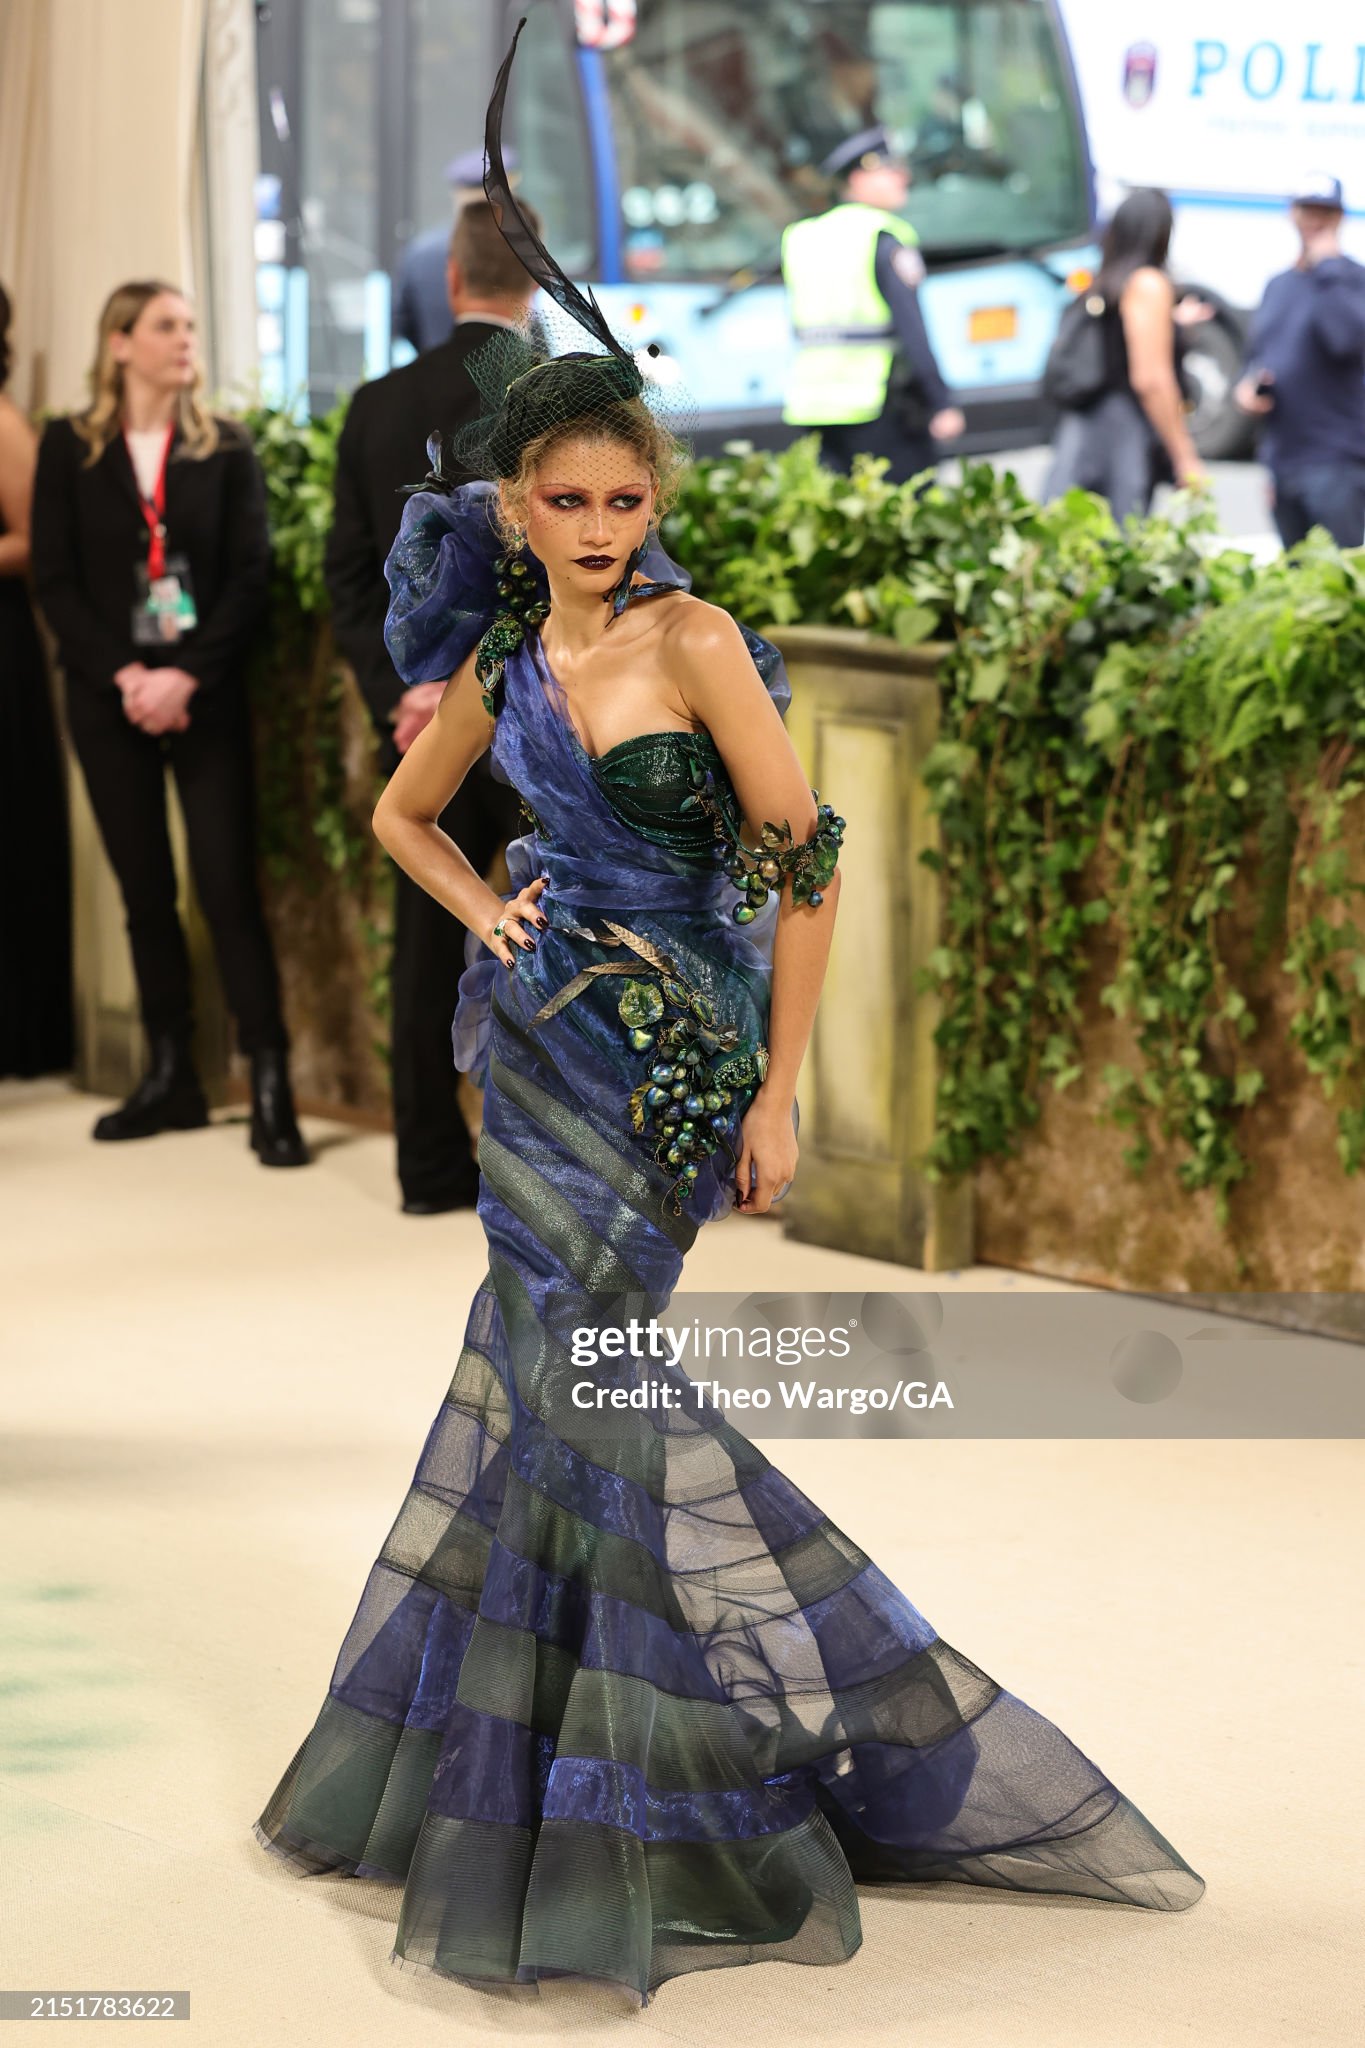 gettyimages-2151783622-2048x2048.jpg